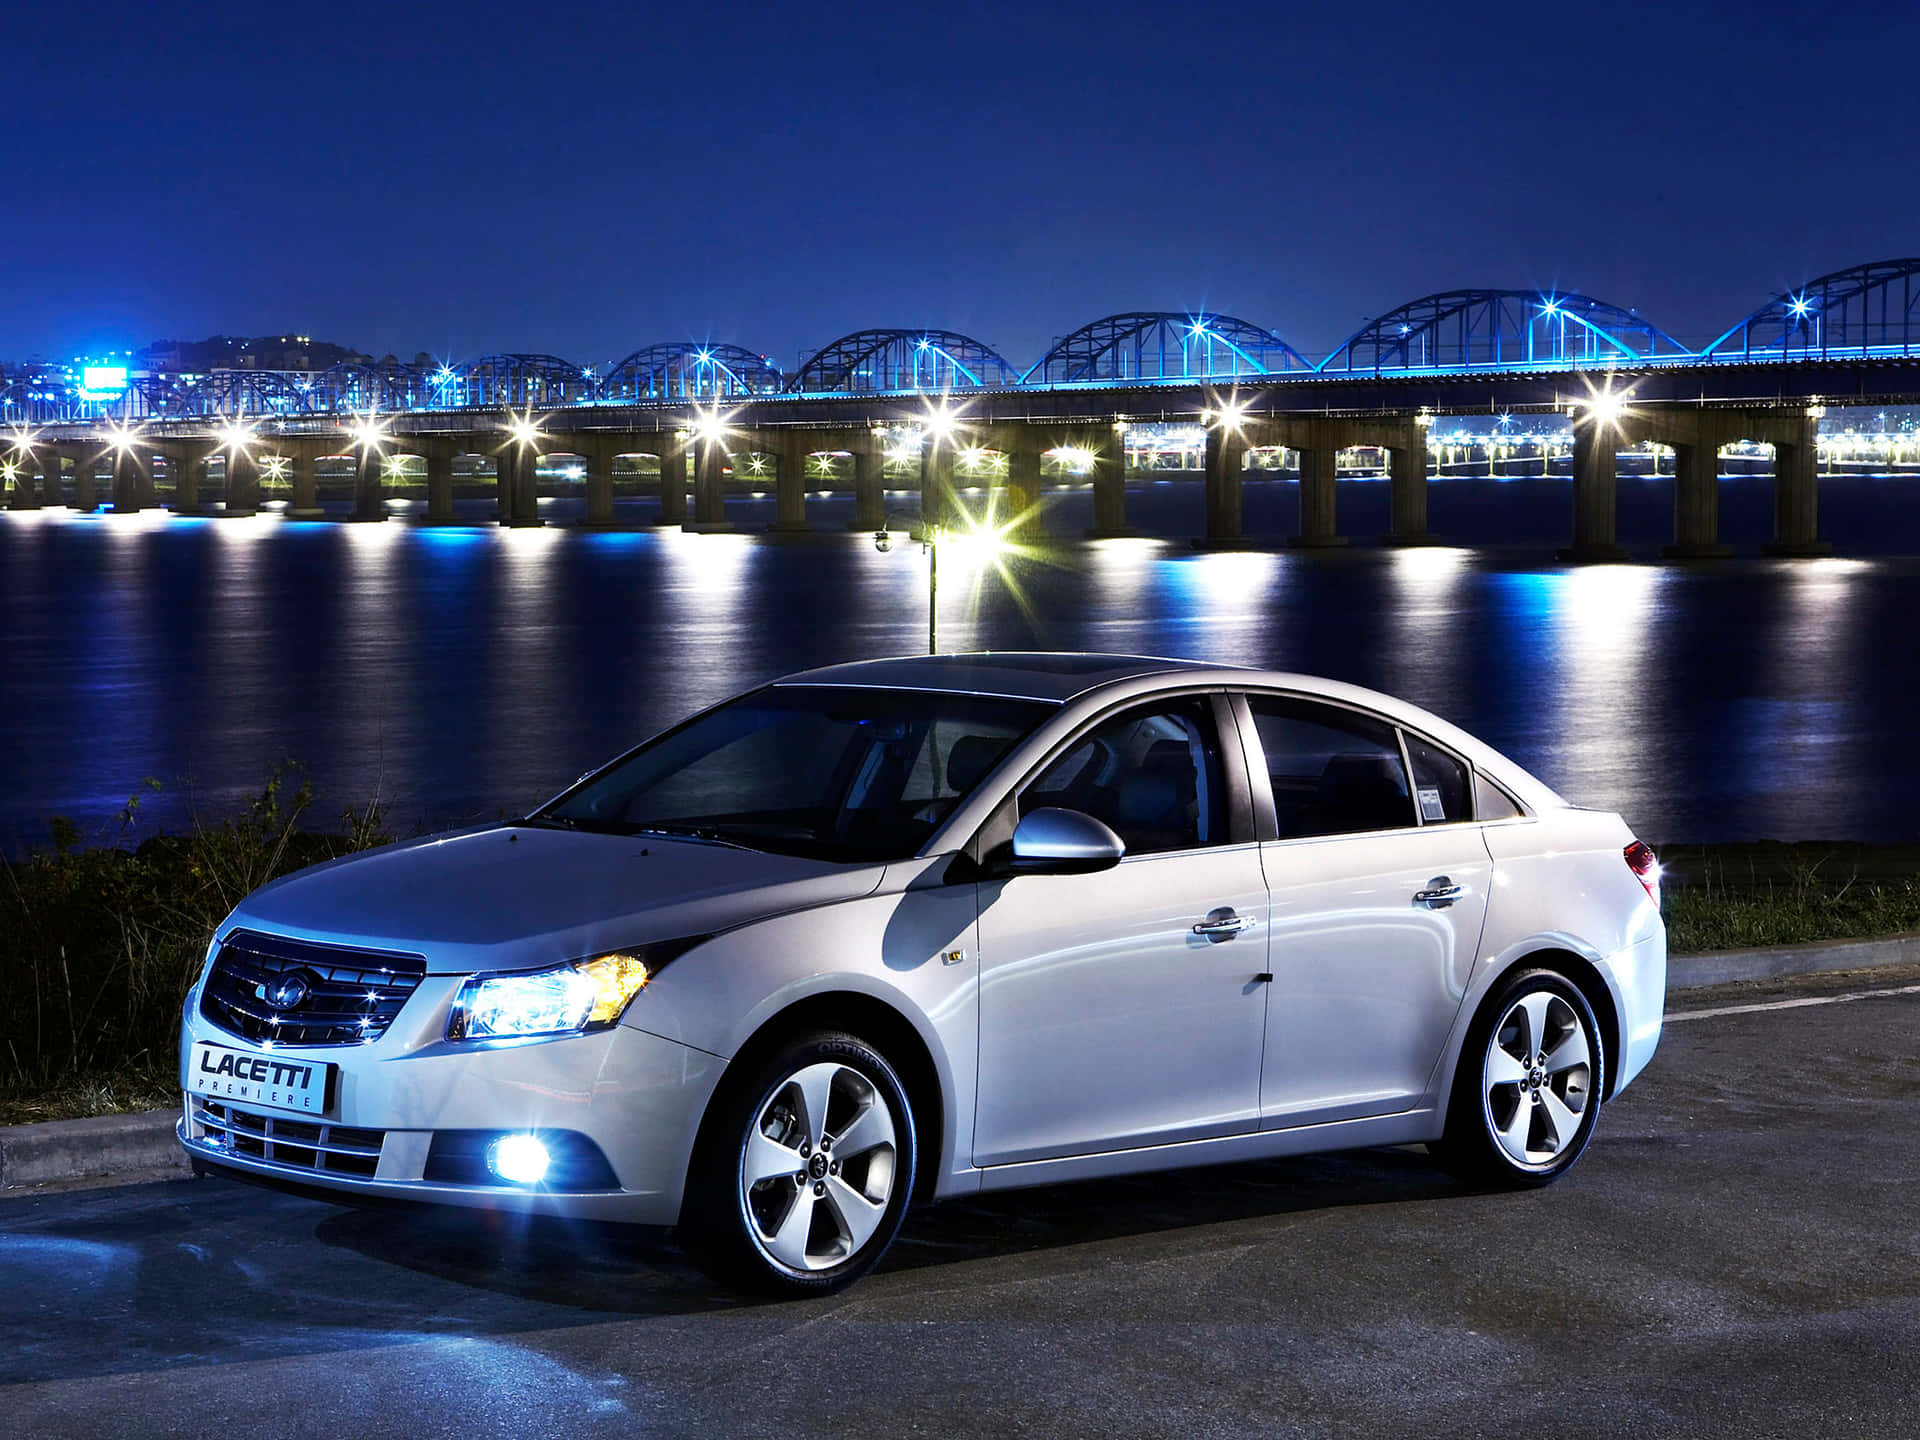 Caption: Elegant Daewoo Lacetti In A Picturesque Setting Wallpaper